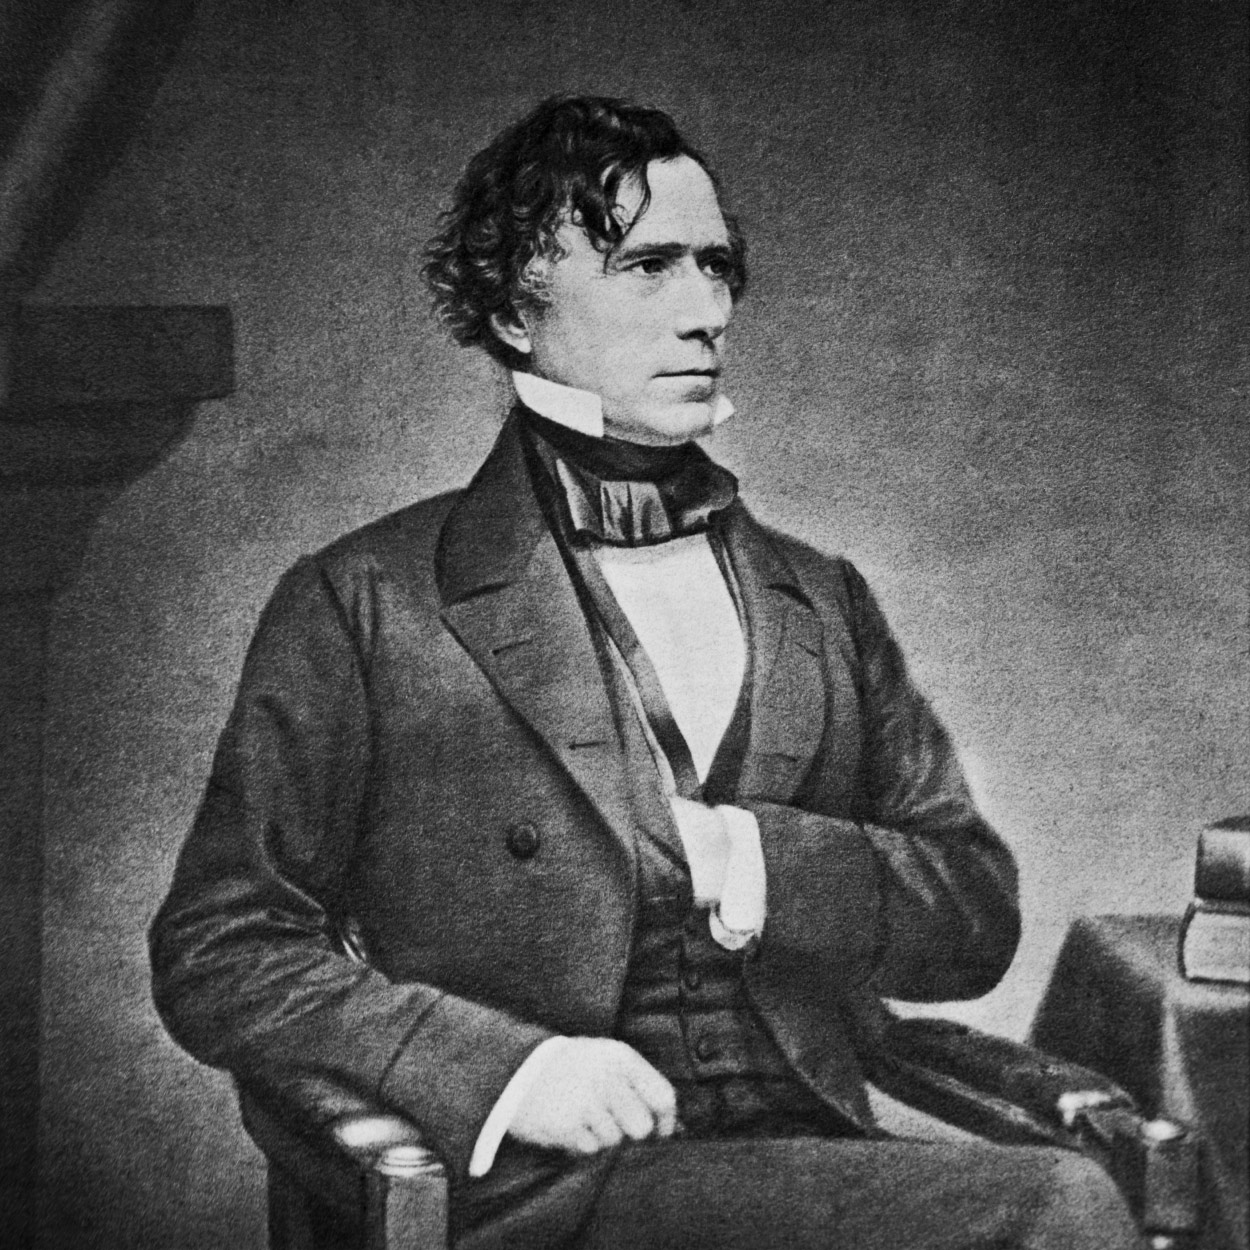 Portrait of Franklin Pierce, the 14th President of the United States